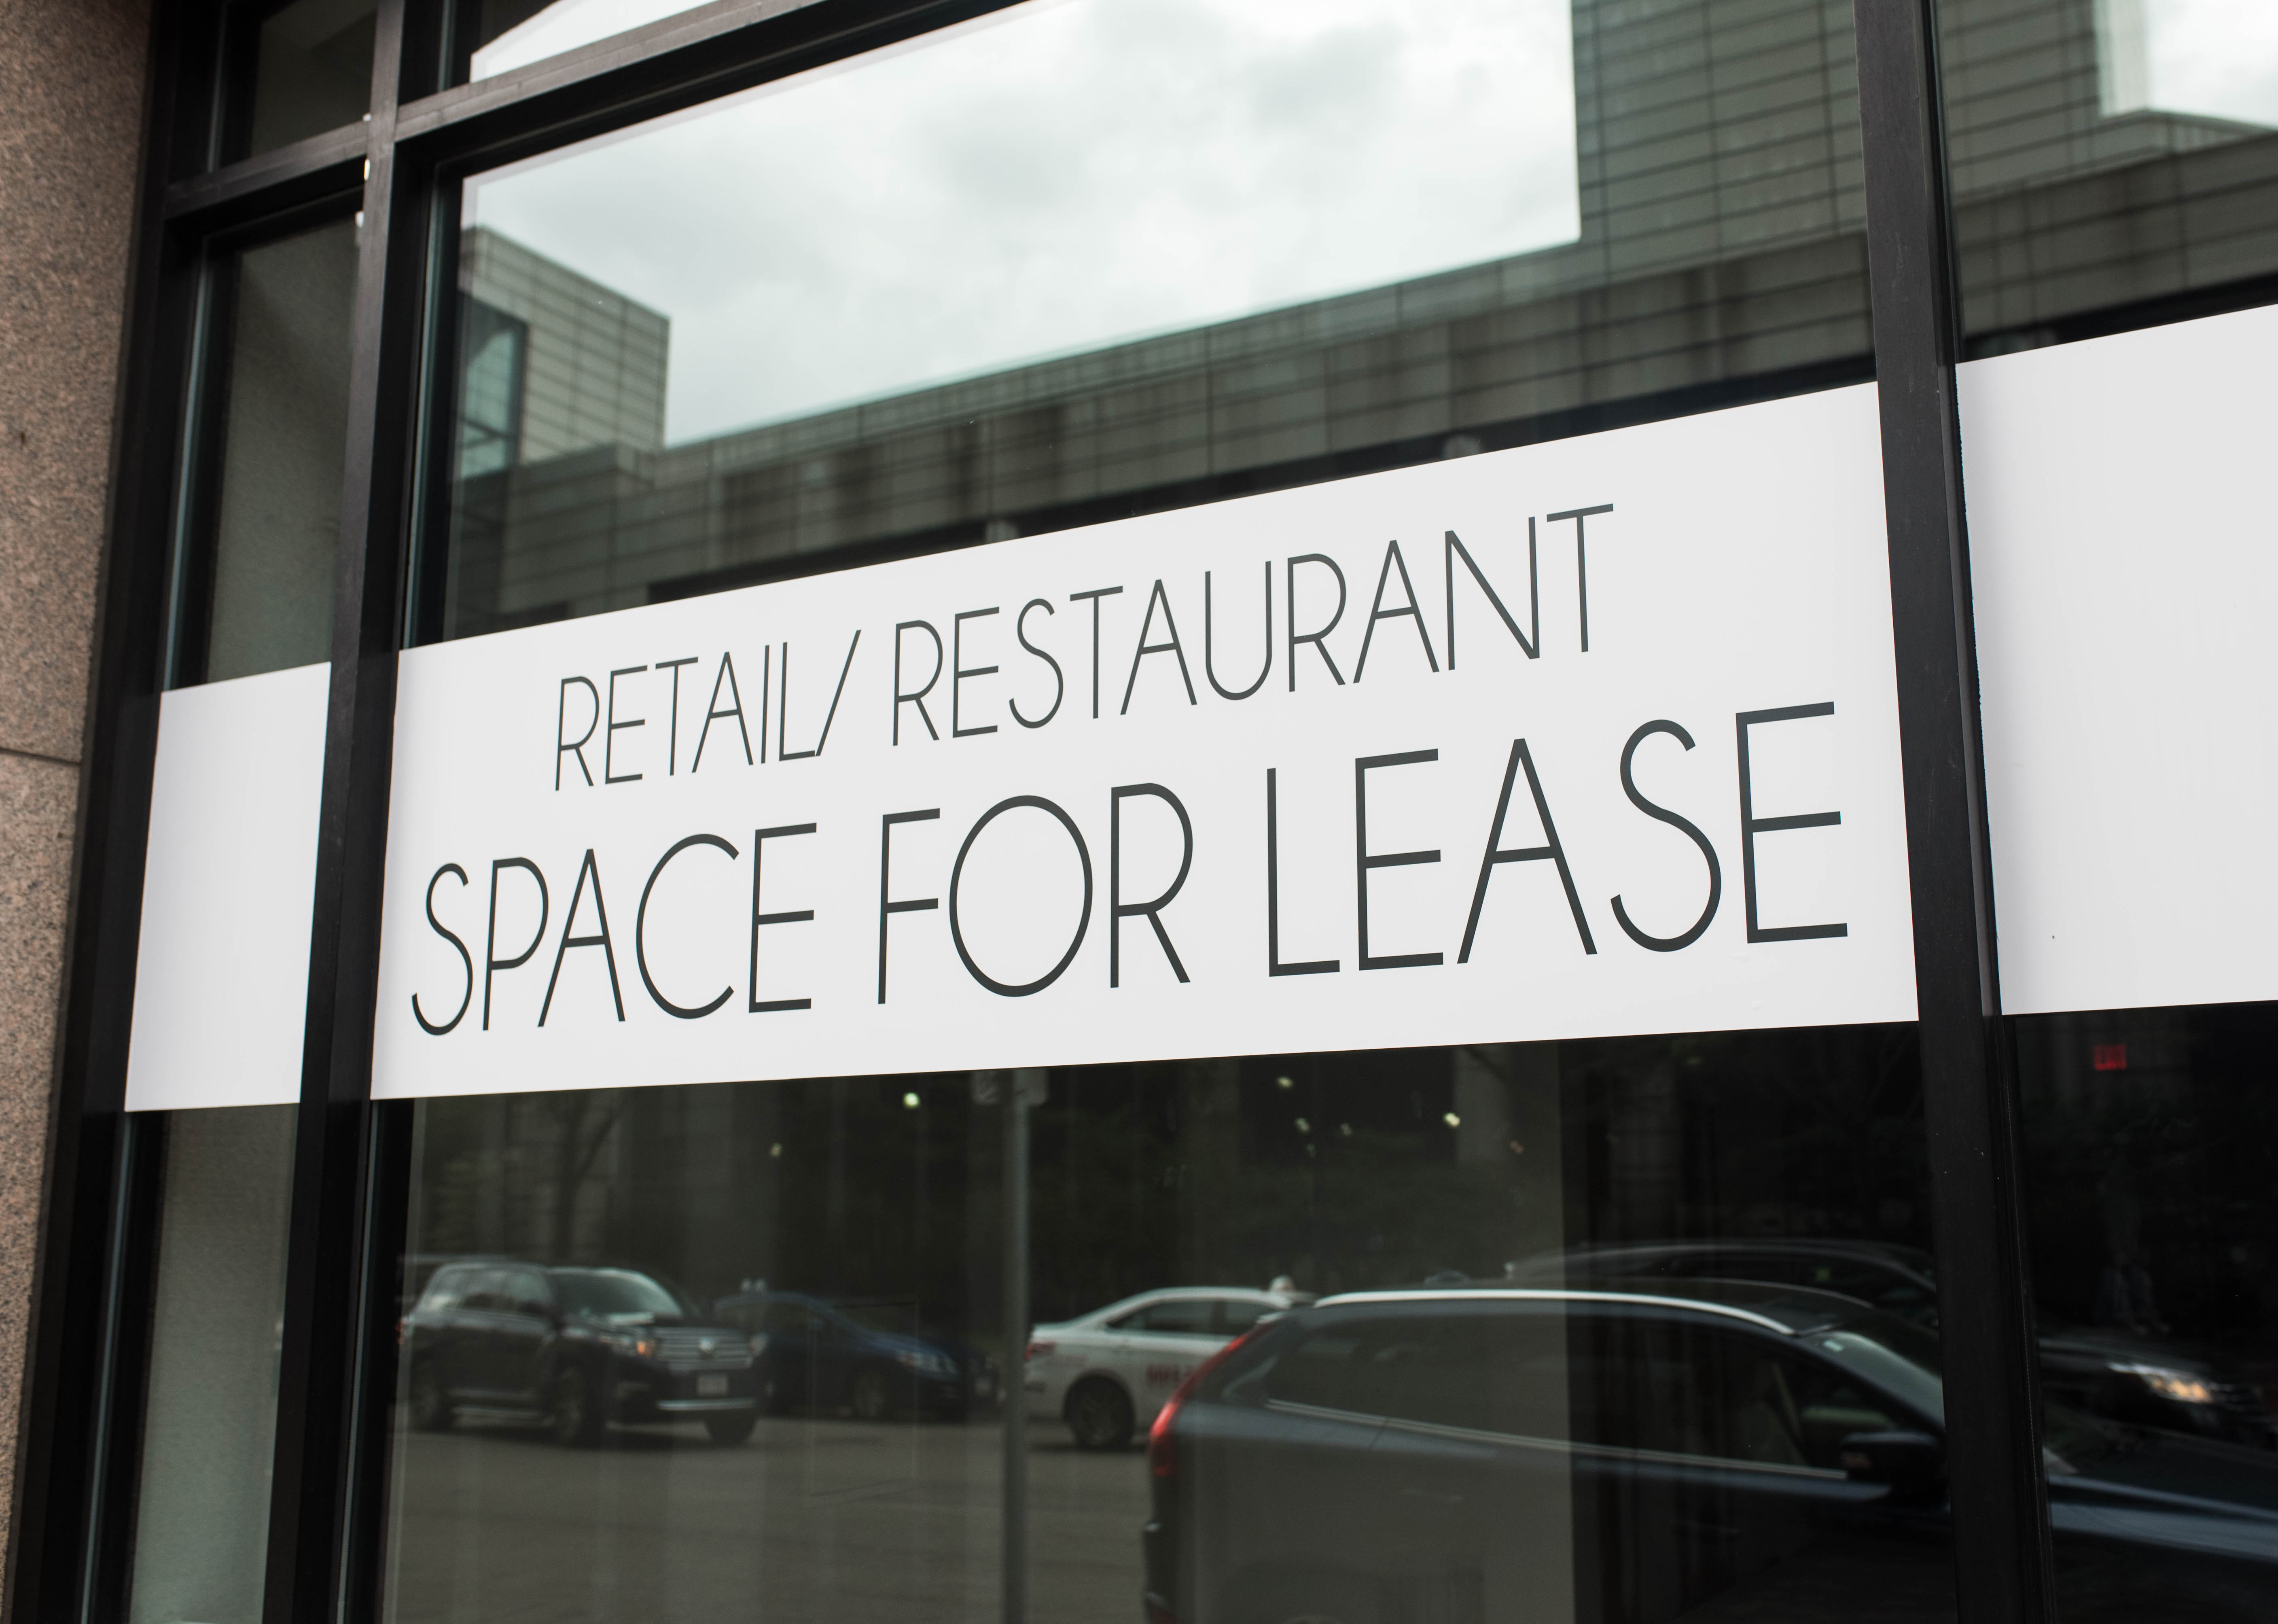 A real estate window mural advertising a restaurant or retail space available for lease